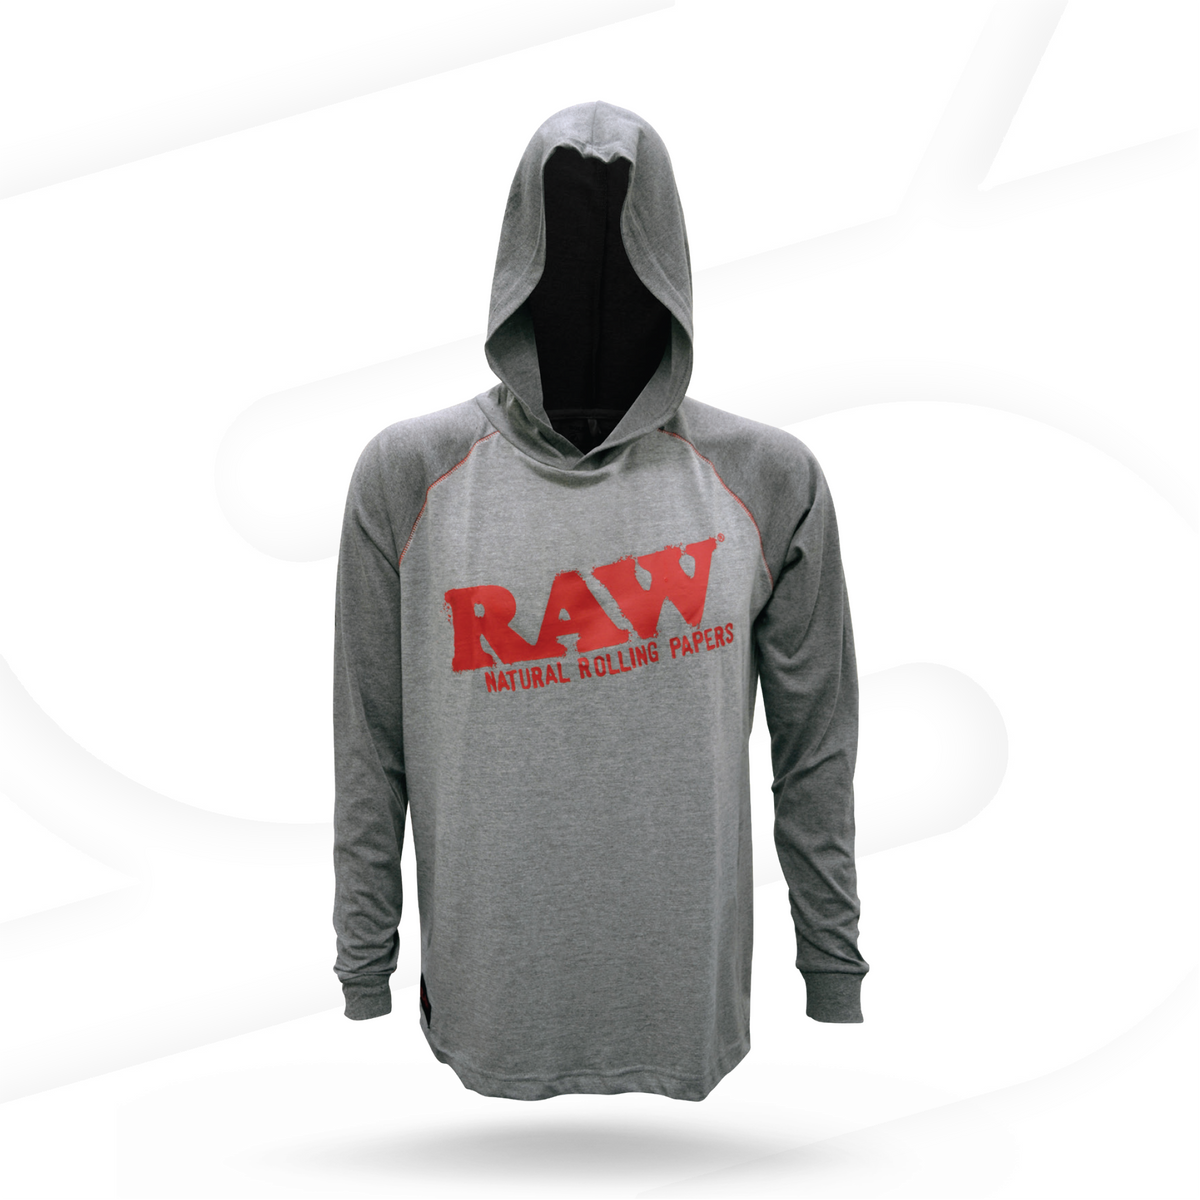 RAW Lightweight Hoodie Shirt Clothing Accessories esd-official